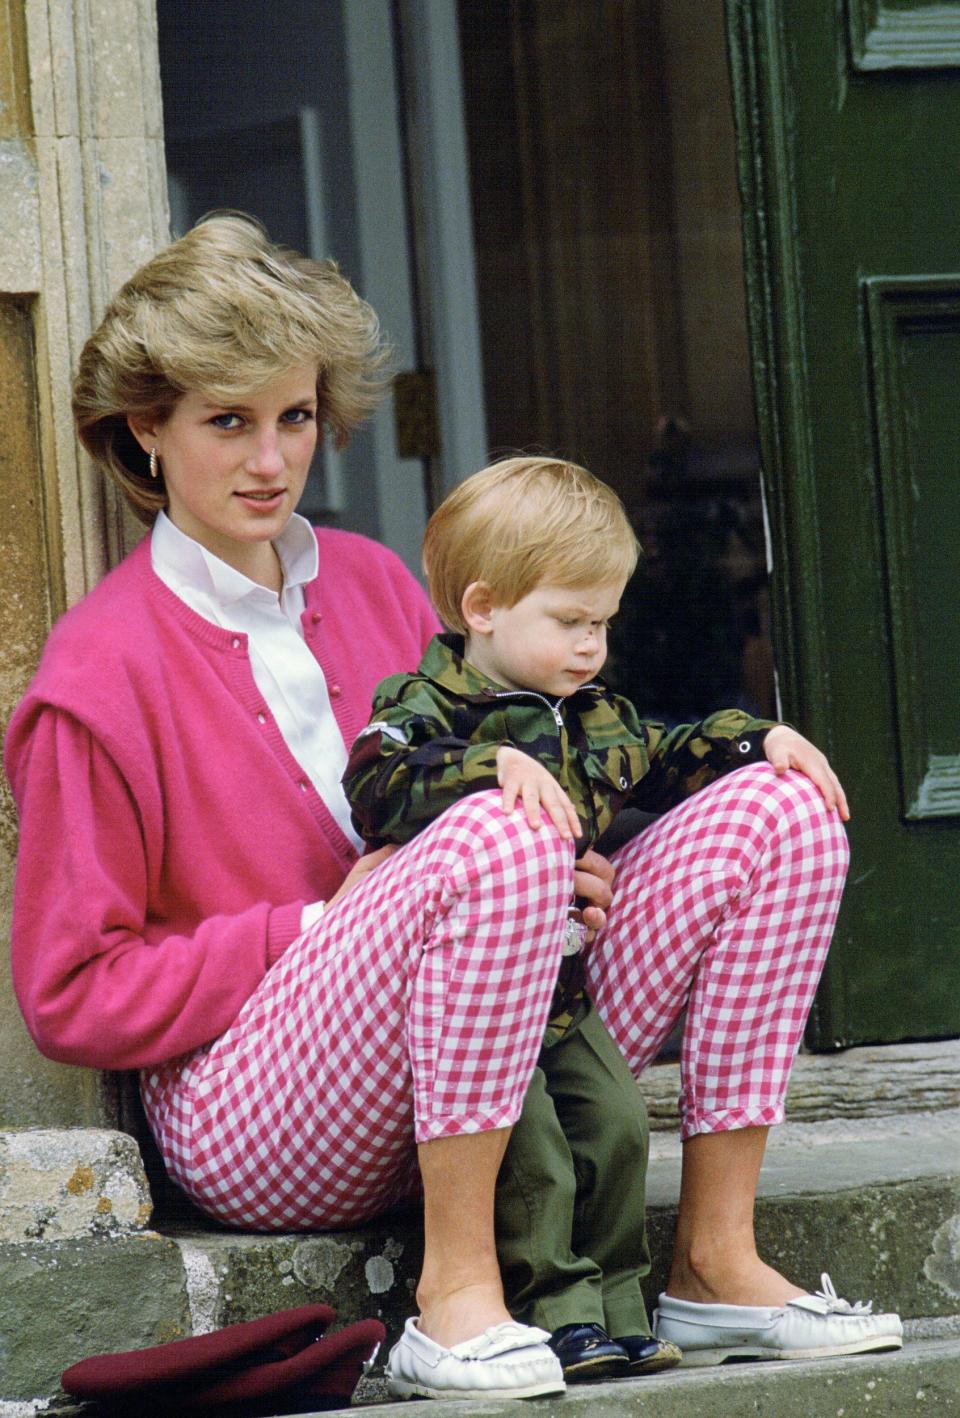 Princess Diana Sitting Outside Highgrove With Her Son Harry Who Is In Uniform As A Soldier - Credit: Tim Graham/Getty